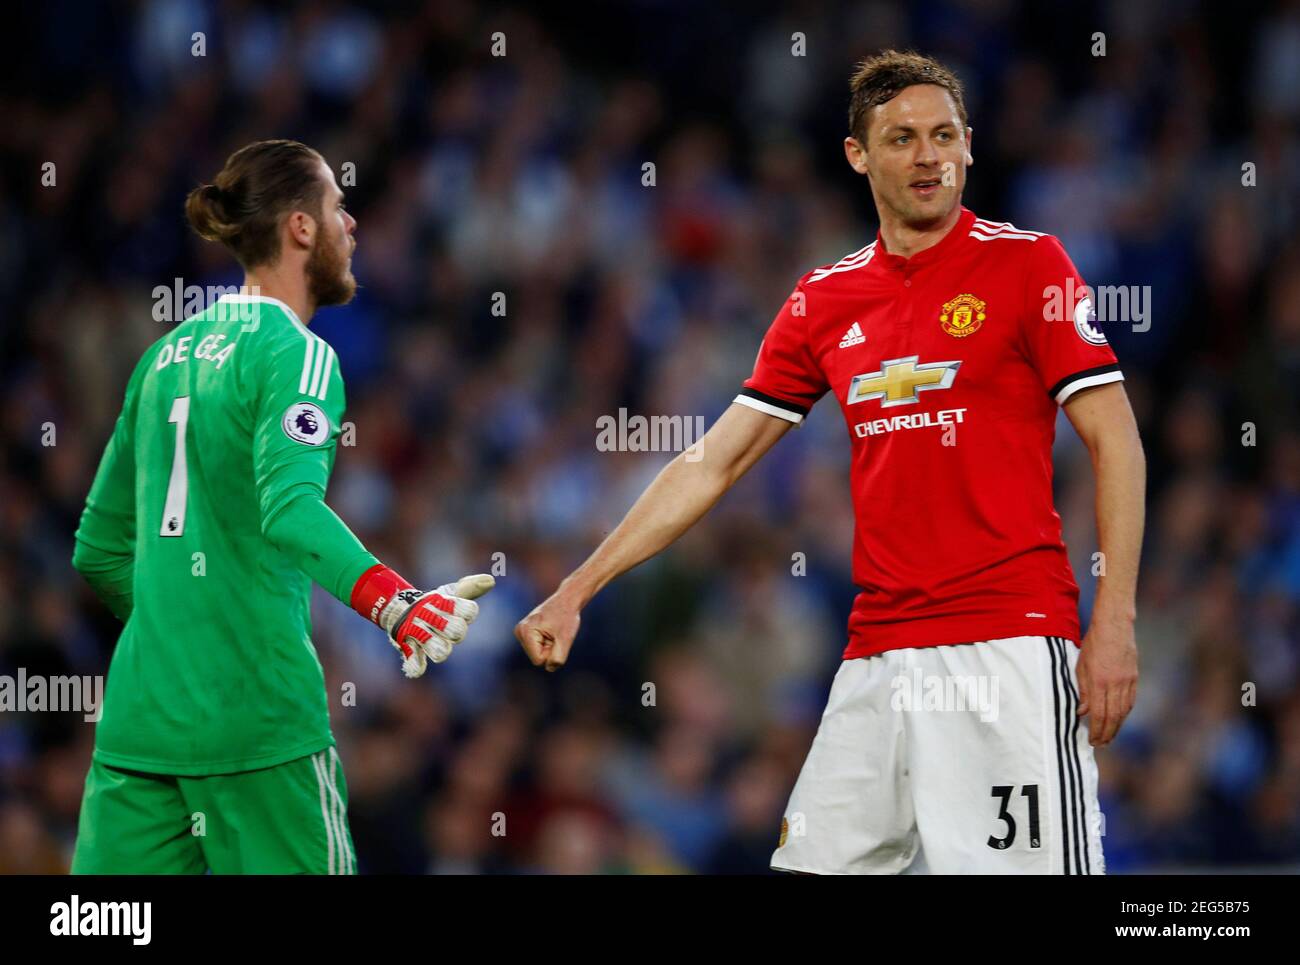 Soccer Football - Premier League - Brighton & Hove Albion v Manchester United - The American Express Community Stadium, Brighton, Britain - May 4, 2018   Manchester United's Nemanja Matic congratulates David De Gea after making a save   REUTERS/Eddie Keogh    EDITORIAL USE ONLY. No use with unauthorized audio, video, data, fixture lists, club/league logos or 'live' services. Online in-match use limited to 75 images, no video emulation. No use in betting, games or single club/league/player publications.  Please contact your account representative for further details. Stock Photo